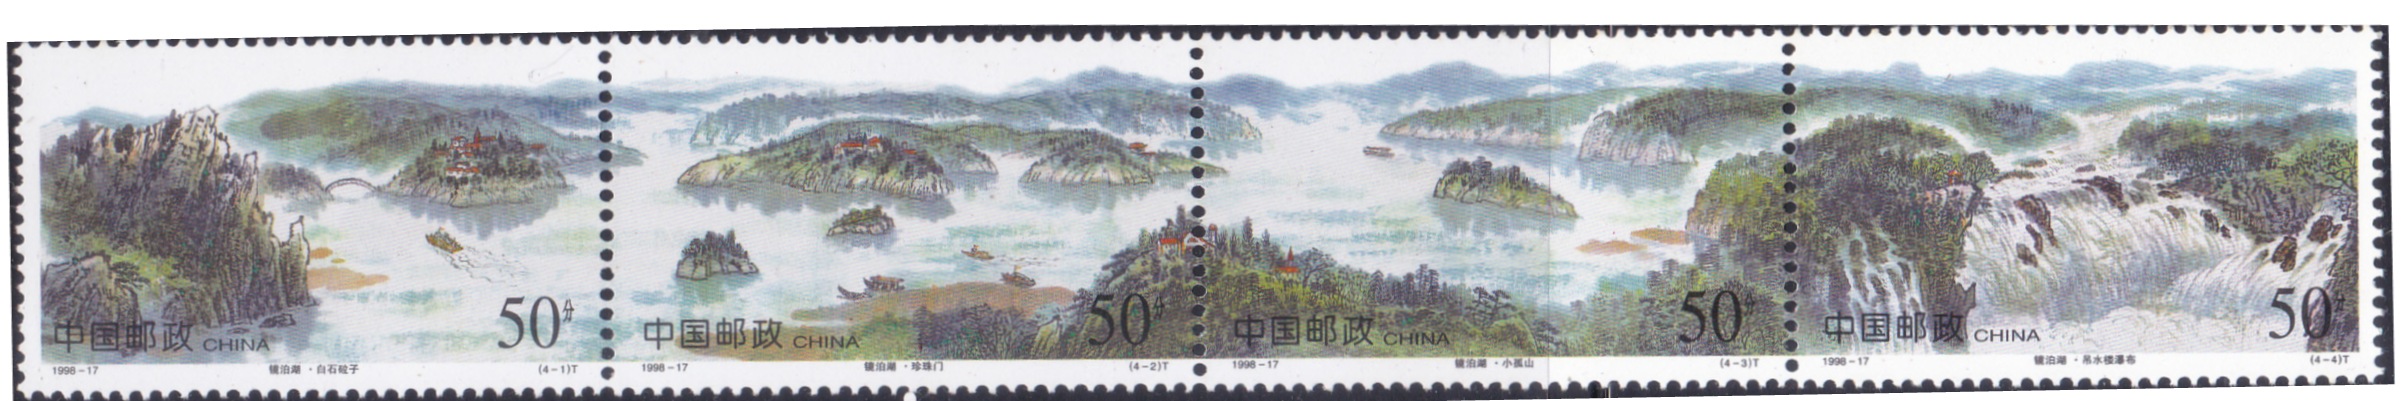 2883-2886 Different views of Jingpo Lake [China se-tenant strip of 4 stamps]